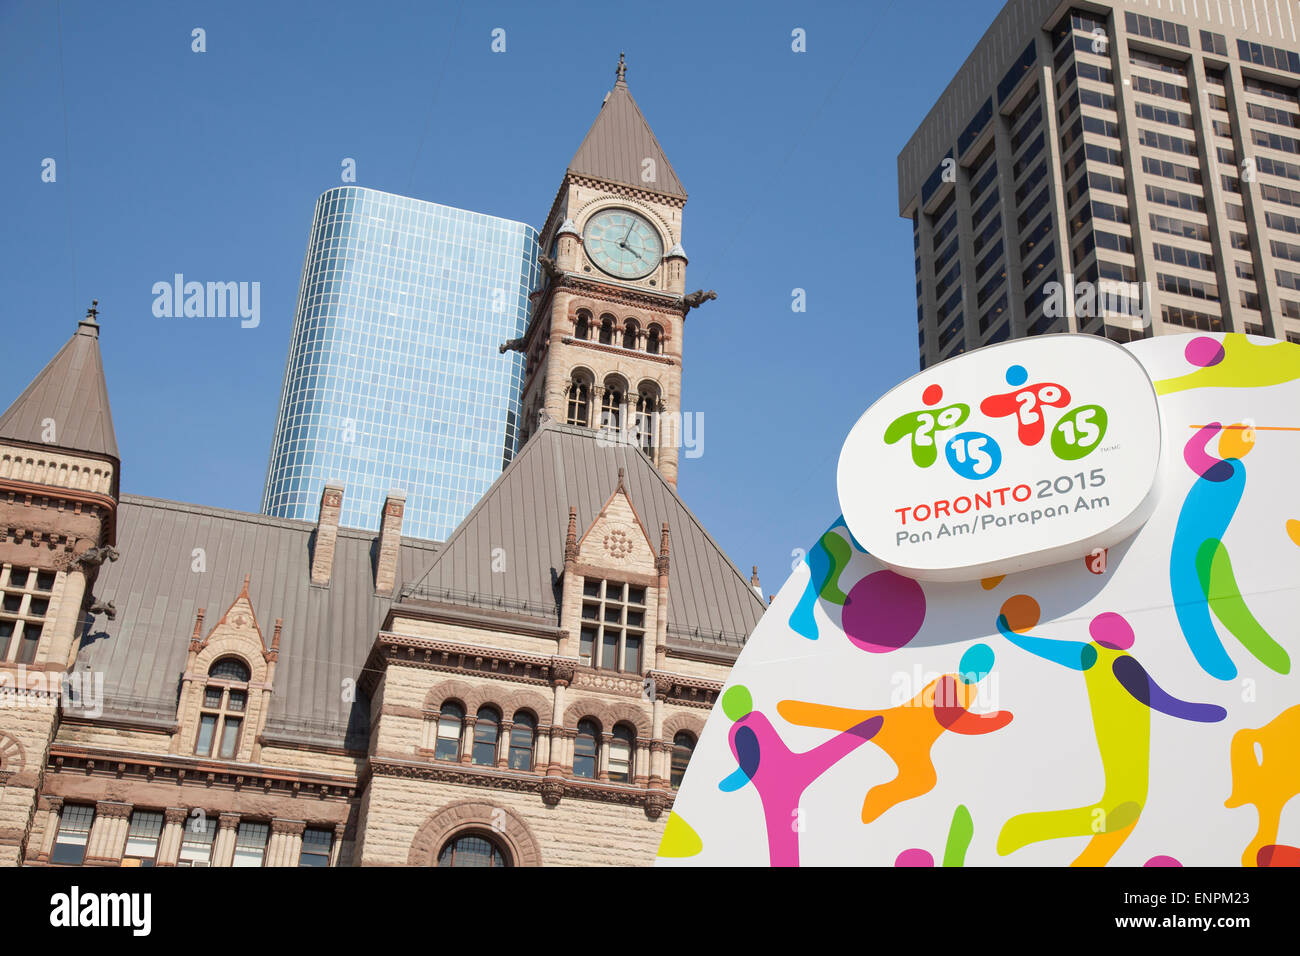 TORONTO - MAY 5, 2015: The sign advertising the 2015 Pan Am/ Parapan Am games located in Nathan Phillips Square, which is to be Stock Photo